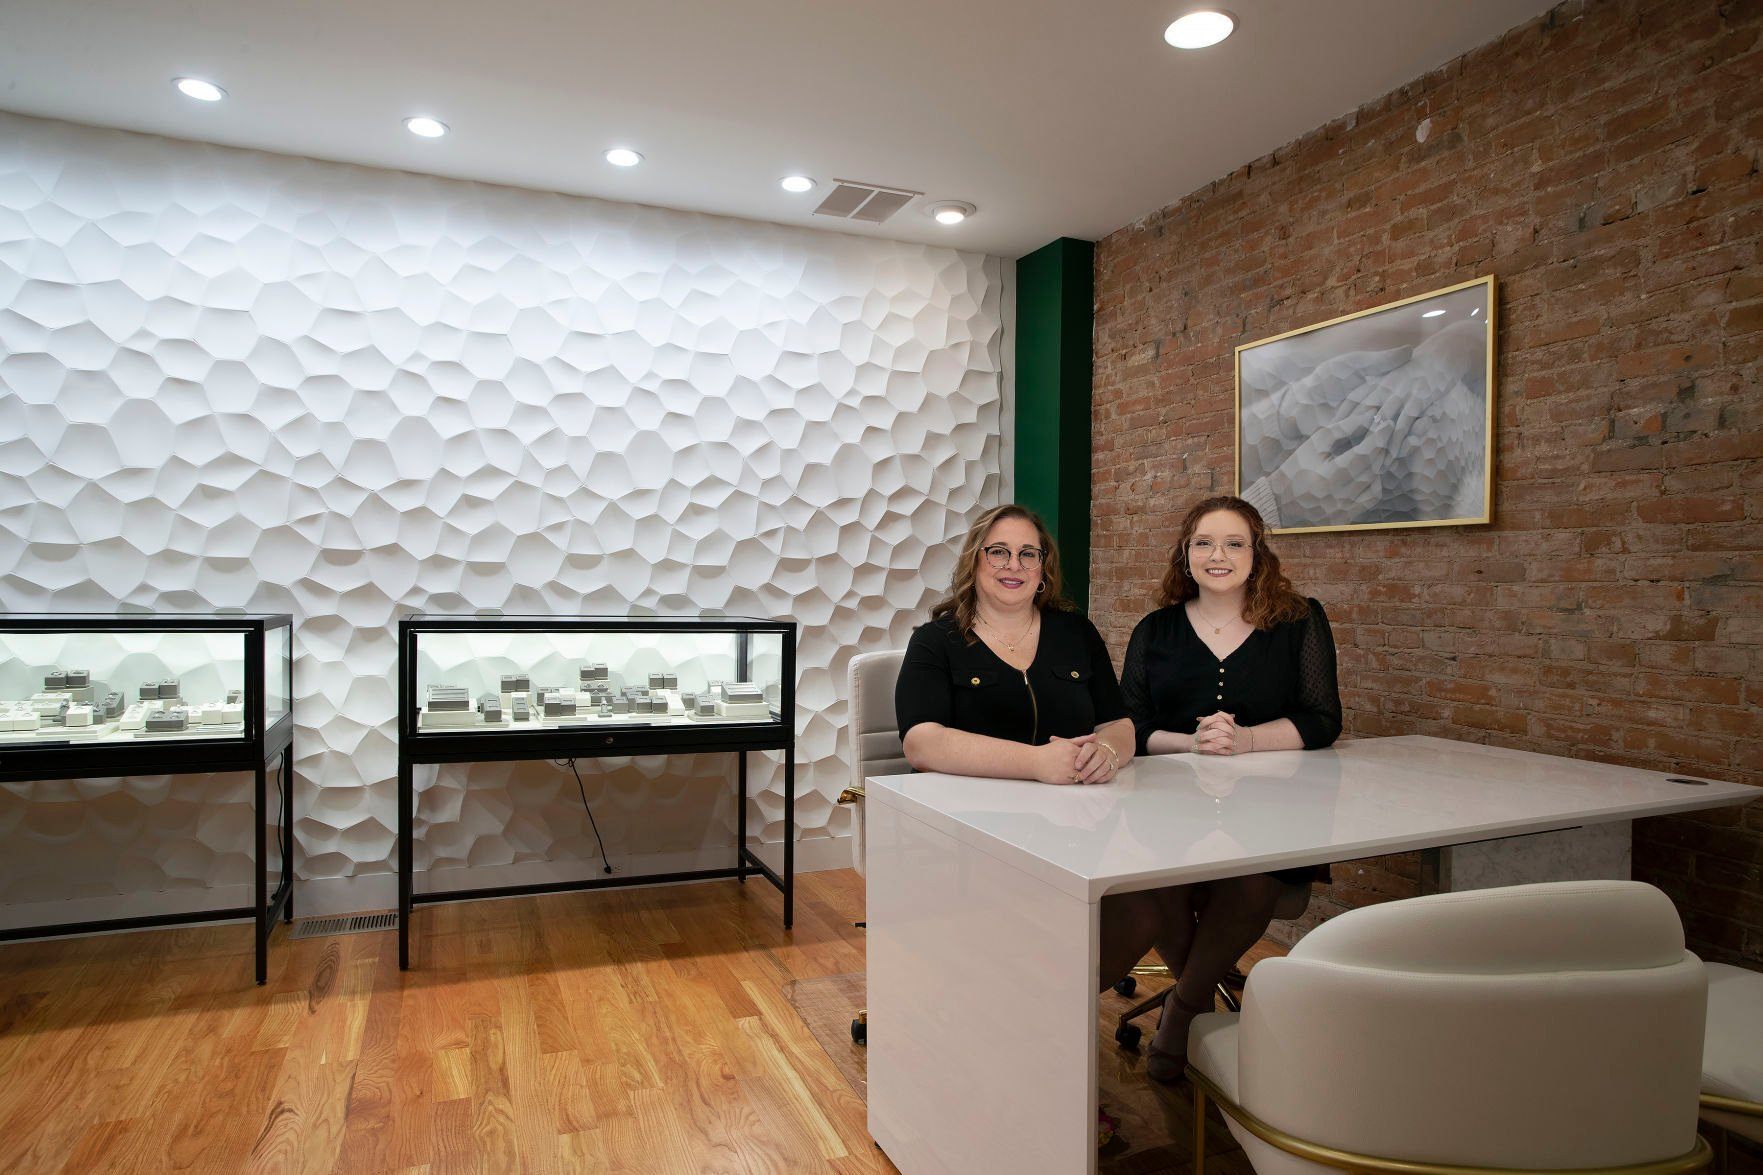 McCoy Goldsmith & Jeweler co-owner Jennifer McCoy (left) and Store Manager Samantha Swift sit in the new addition to the longtime Main Street location in Dubuque on Thursday, May 5, 2022.    PHOTO CREDIT: Stephen Gassman